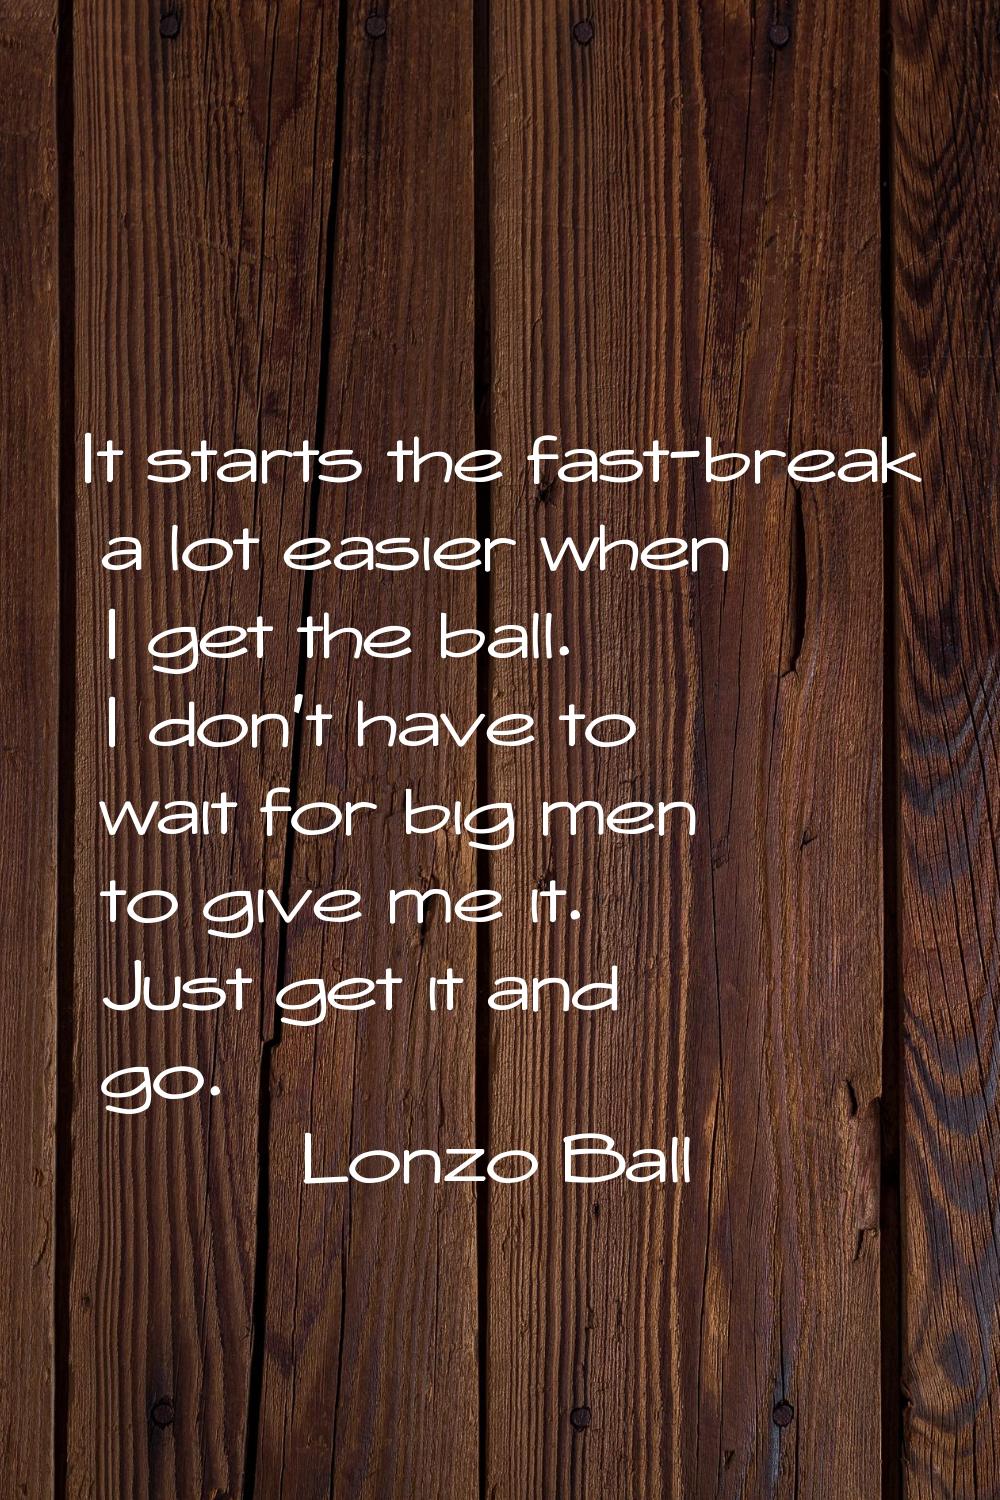 It starts the fast-break a lot easier when I get the ball. I don't have to wait for big men to give